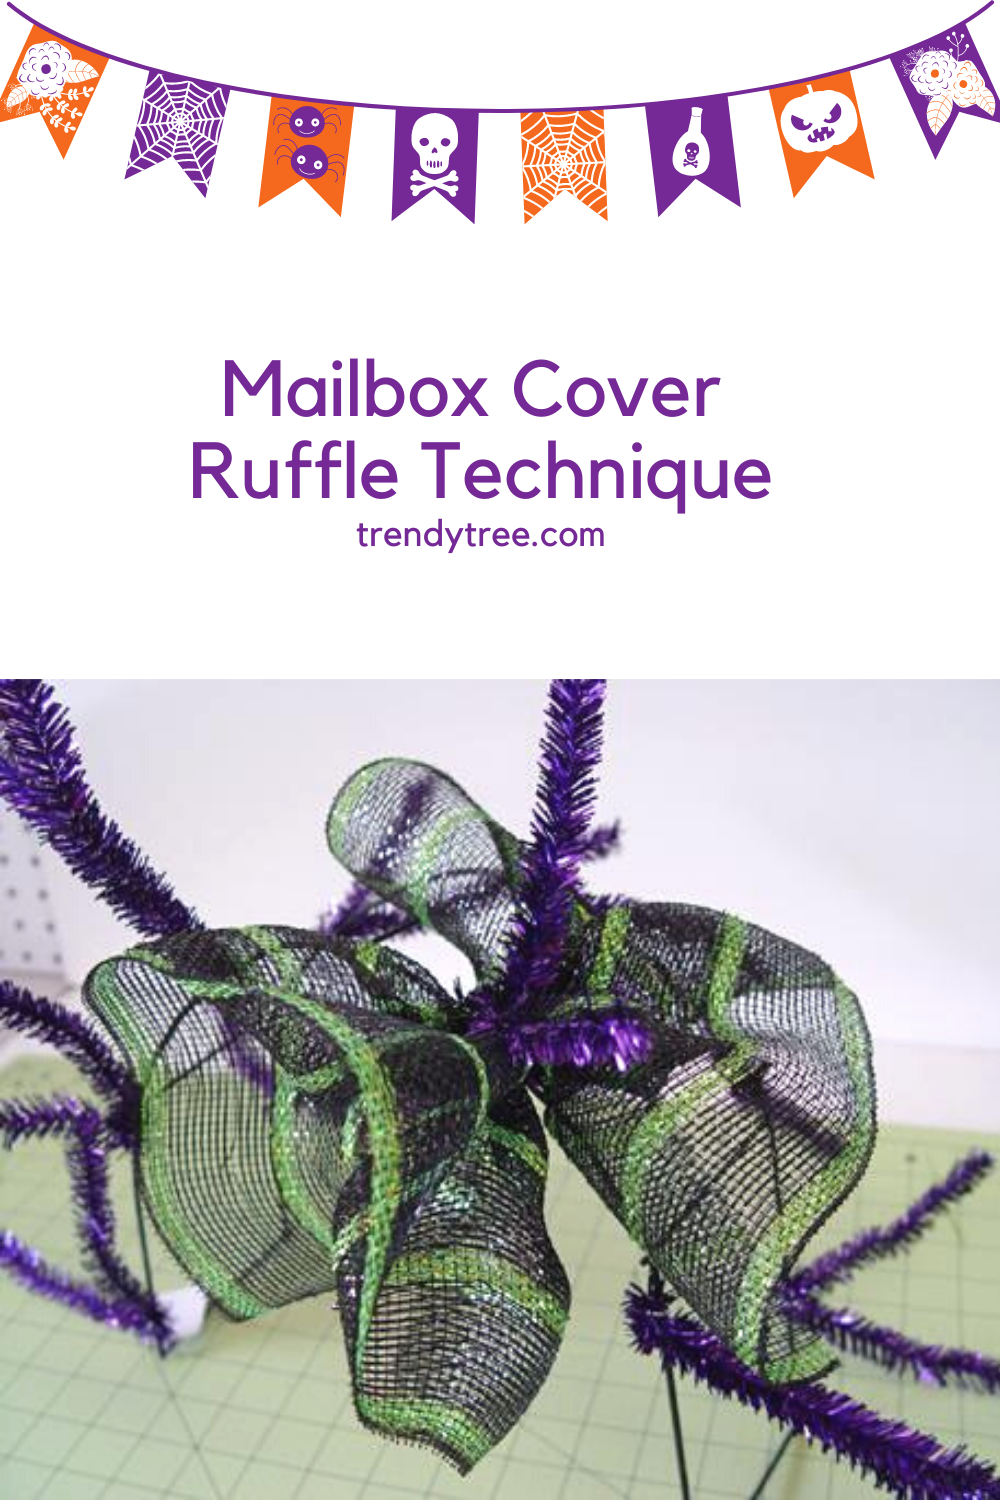 Mailbox cover made with Deco mesh from Trendy Tree